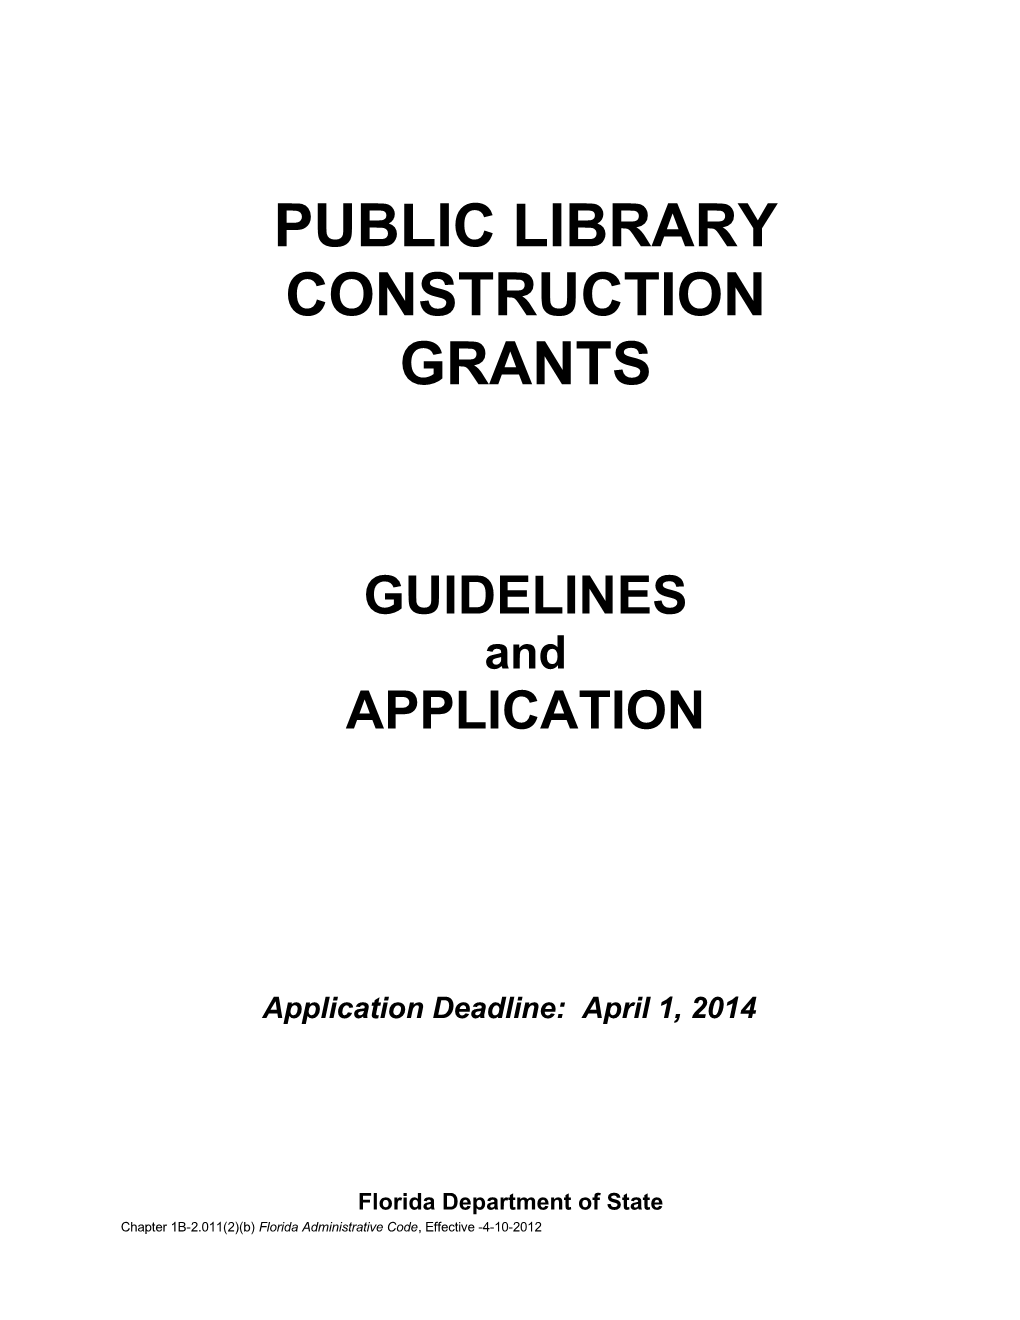 Library Construction Grants